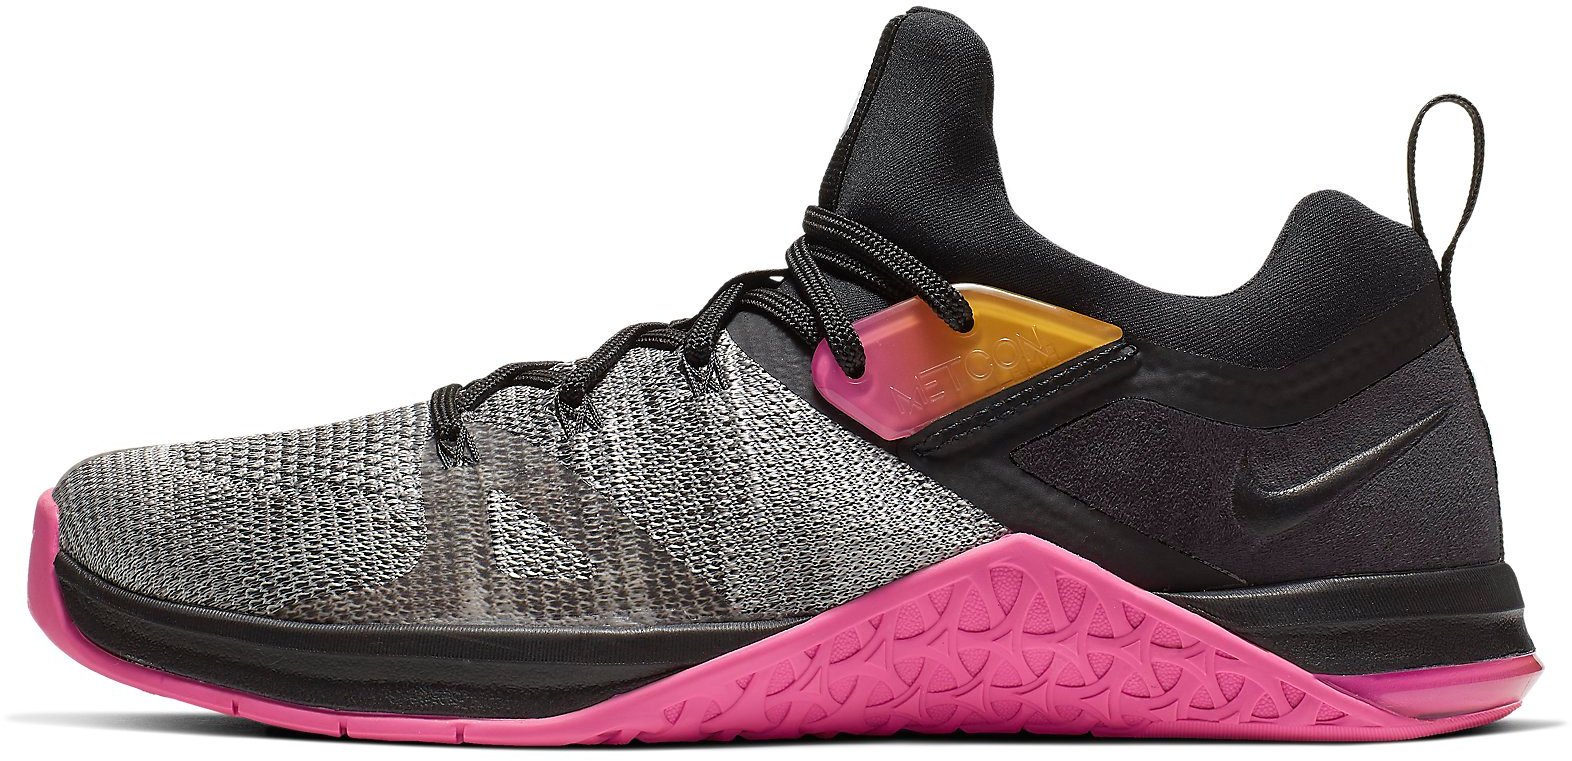 Fitness shoes Nike WMNS METCON FLYKNIT 3